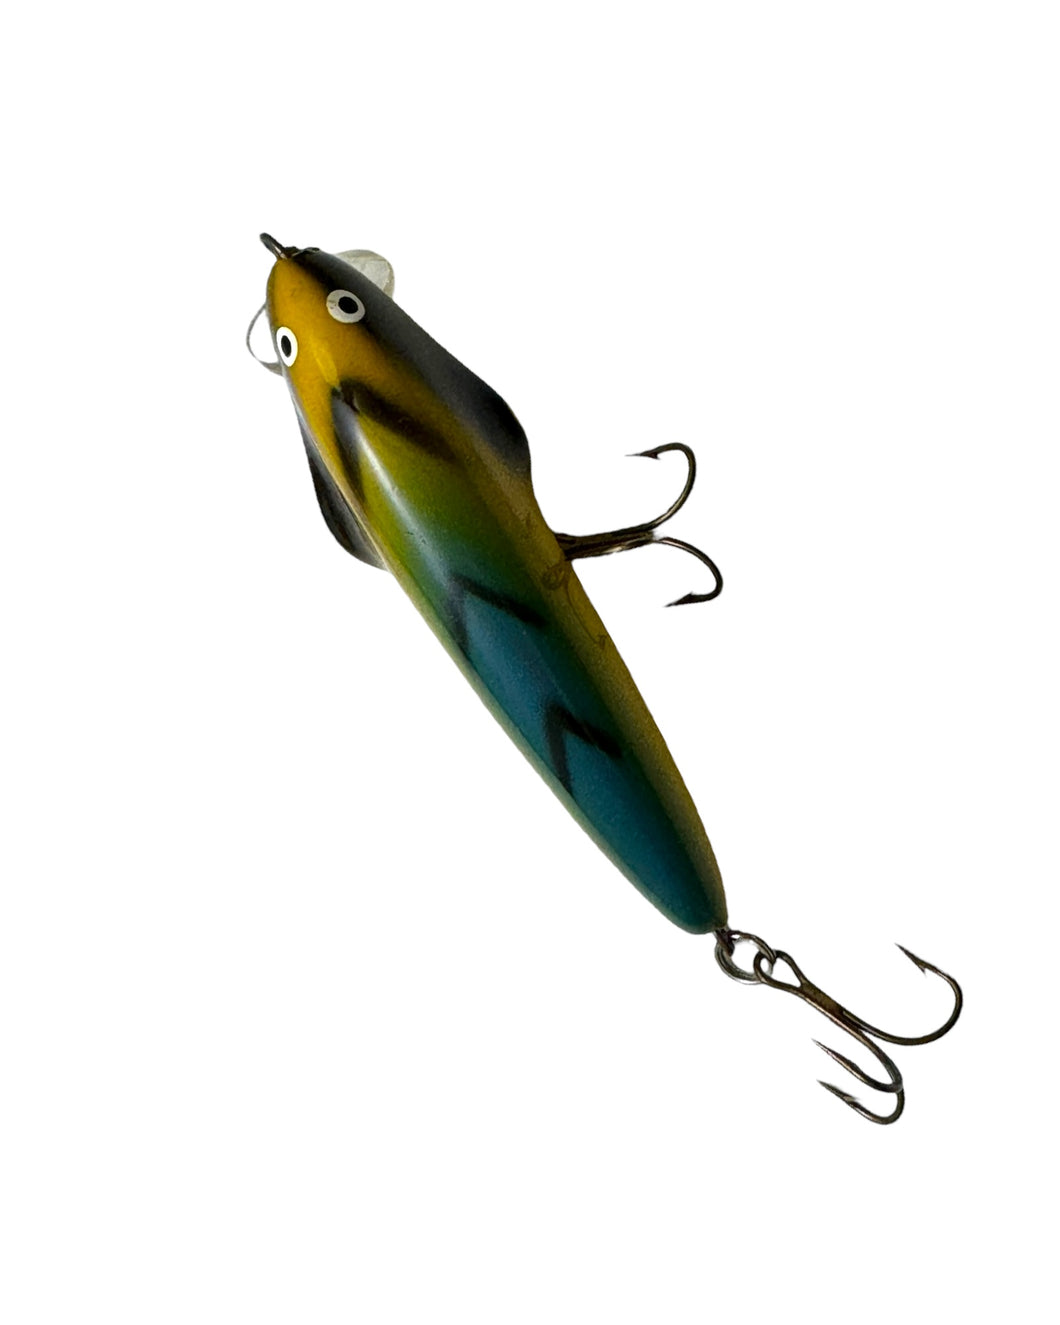 Top View of NILS MASTER of Finland SPEARHEAD Fishing Lure in YELLOW GREEN BLUE H-BONE